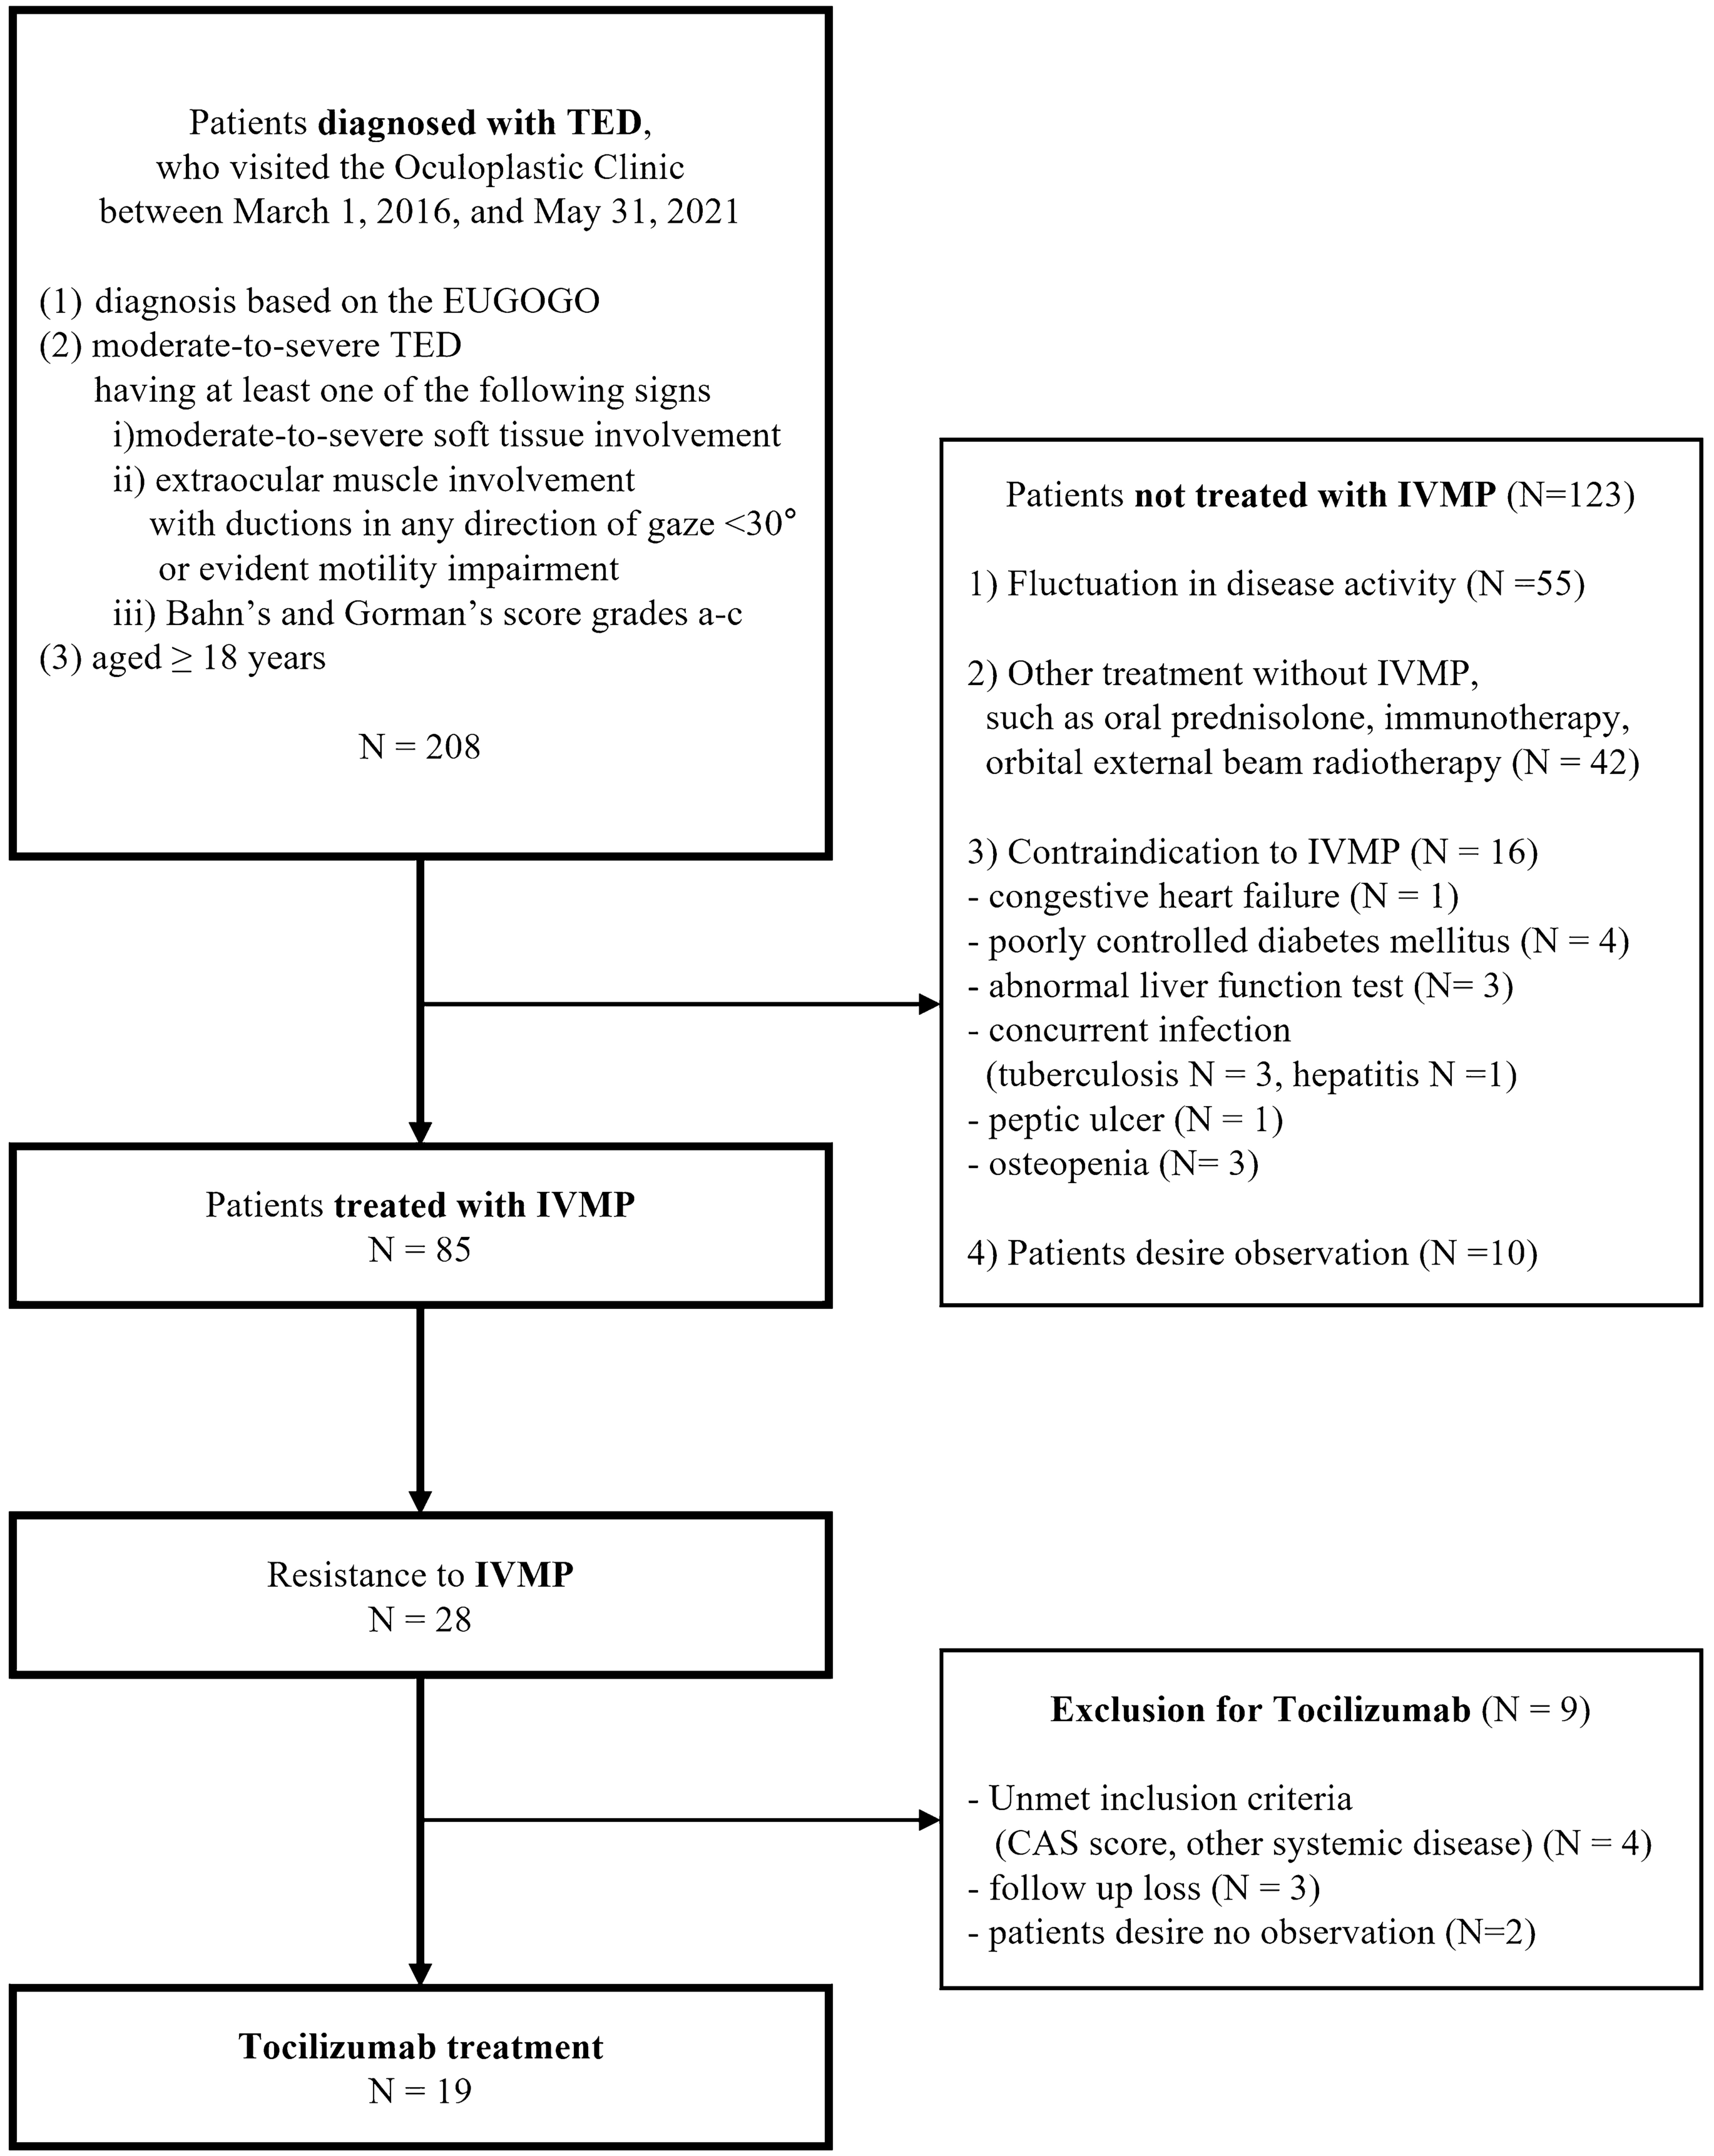 Efficacy of tocilizumab in patients with moderate-to-severe corticosteroid-resistant thyroid eye disease: a prospective study